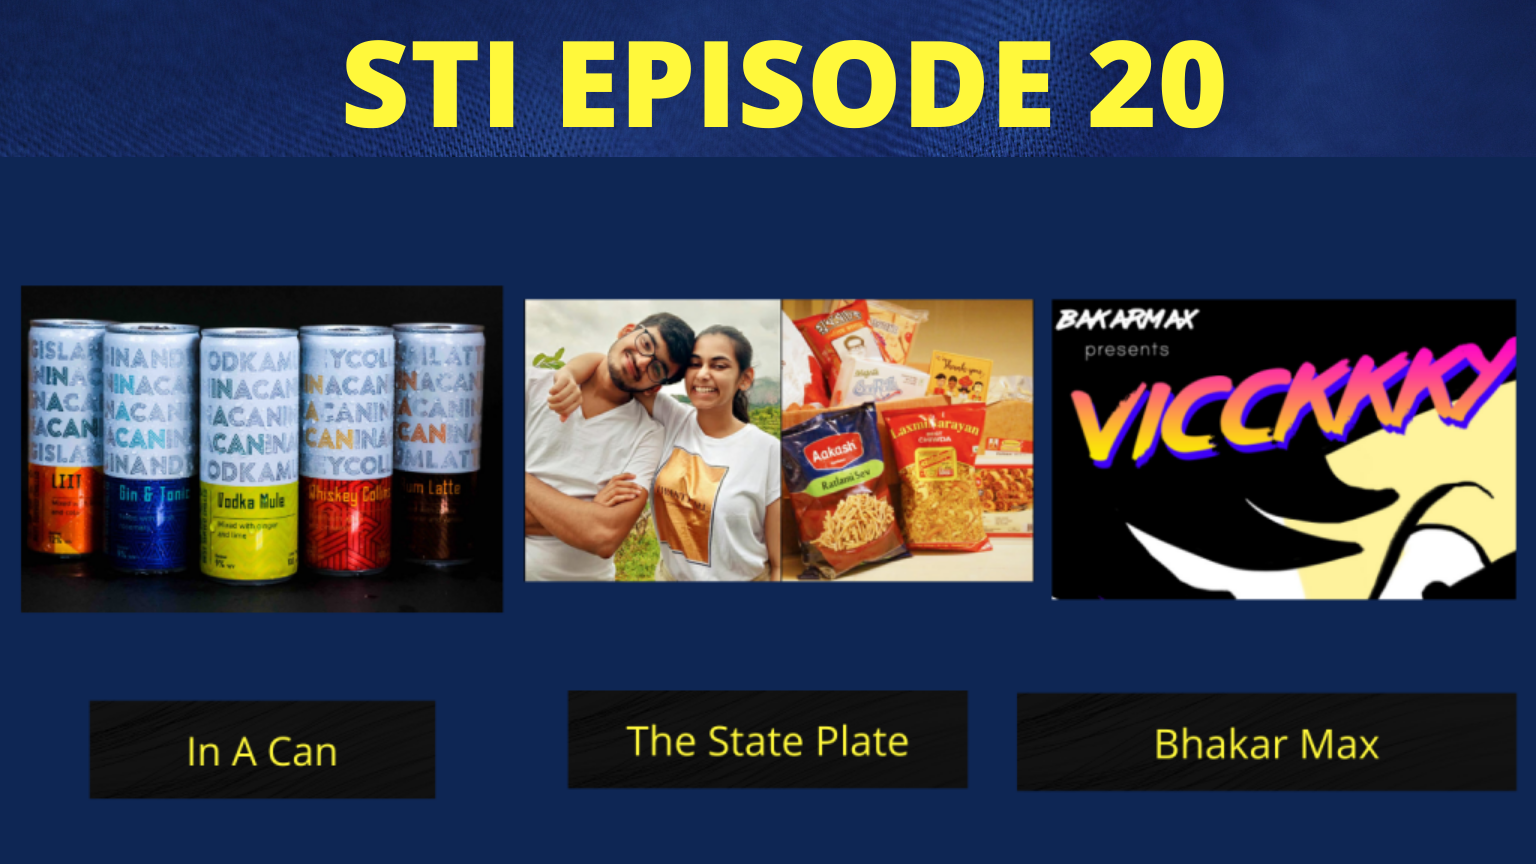 shark tank india in a can episode 20